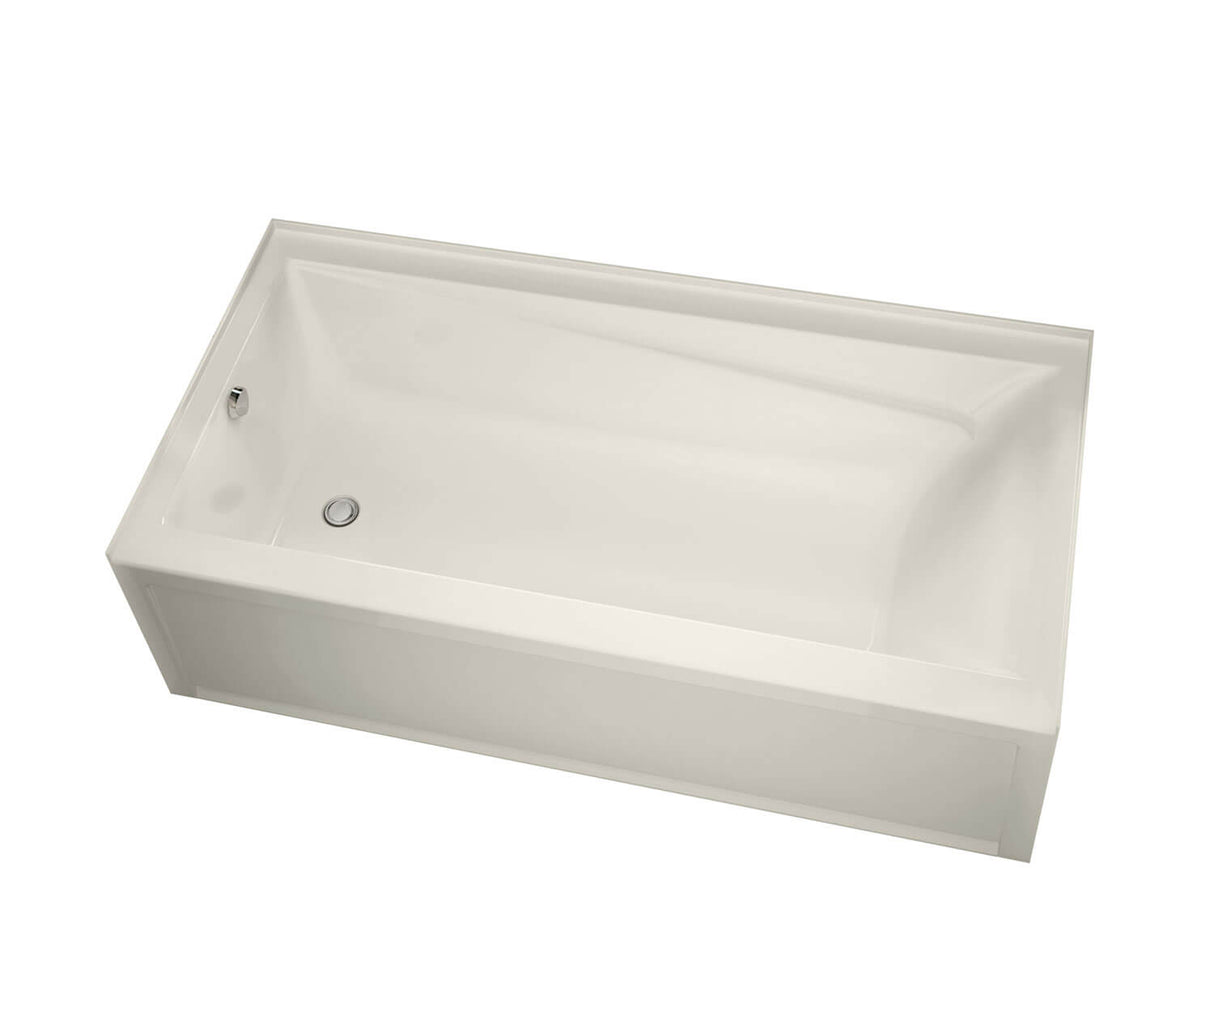 MAAX 105519-003-007-101 Exhibit 6030 IFS Acrylic Alcove Right-Hand Drain Whirlpool Bathtub in Biscuit